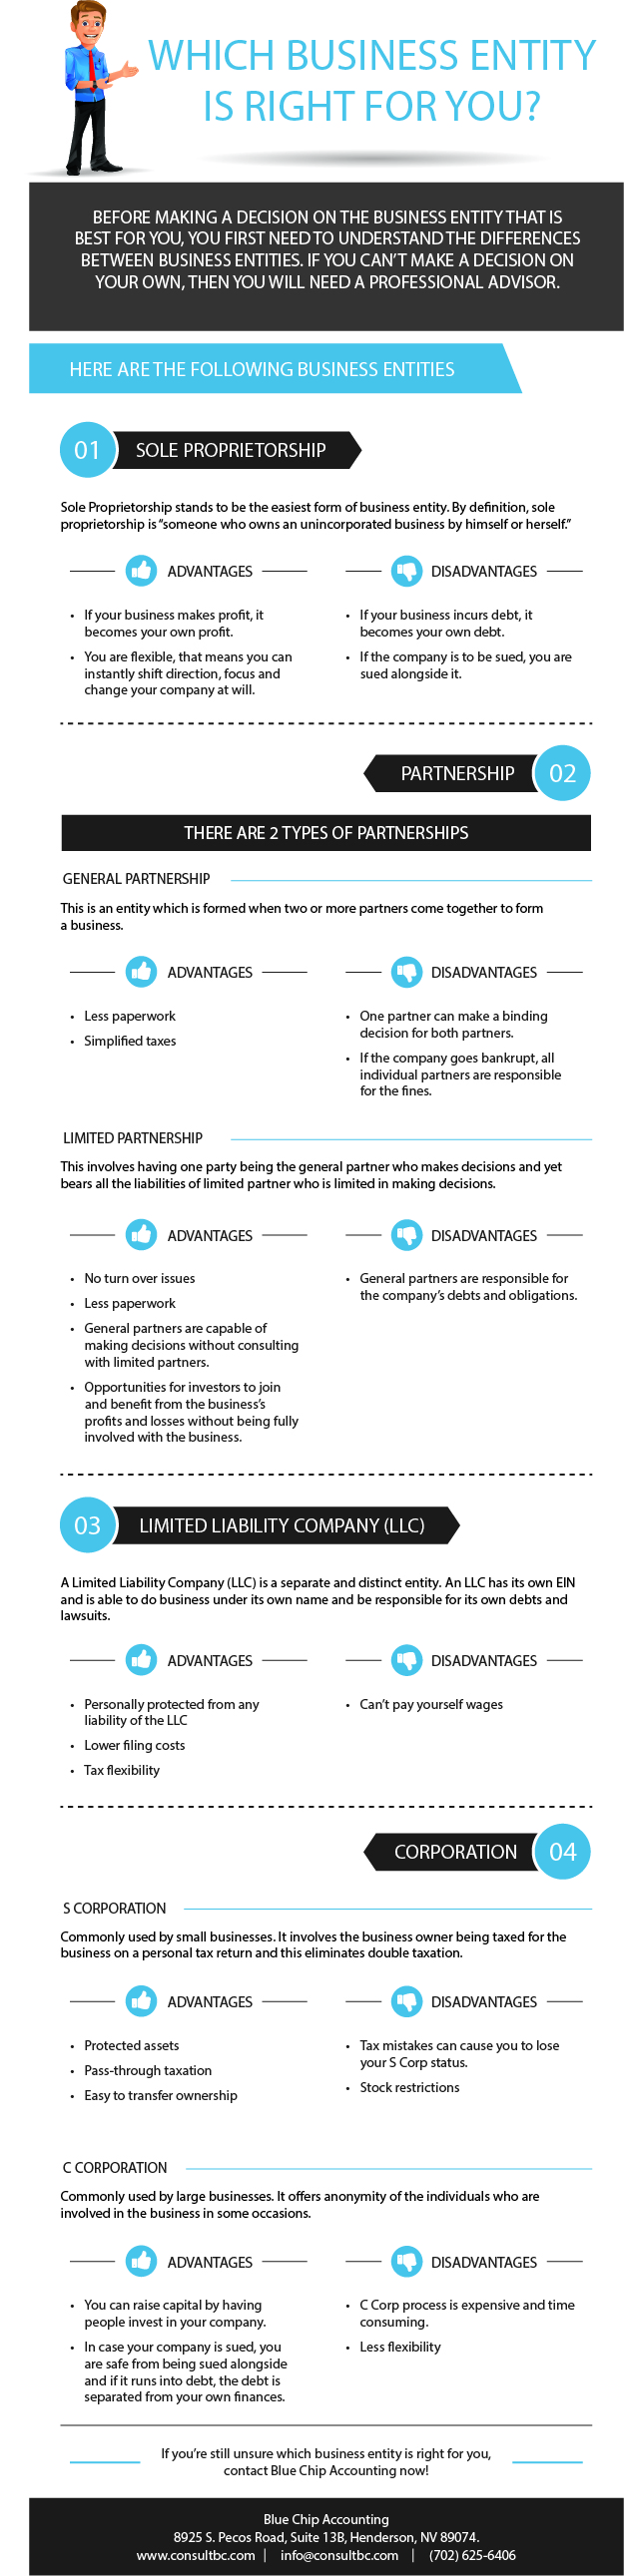 Edited Business_Entity_Infographic4